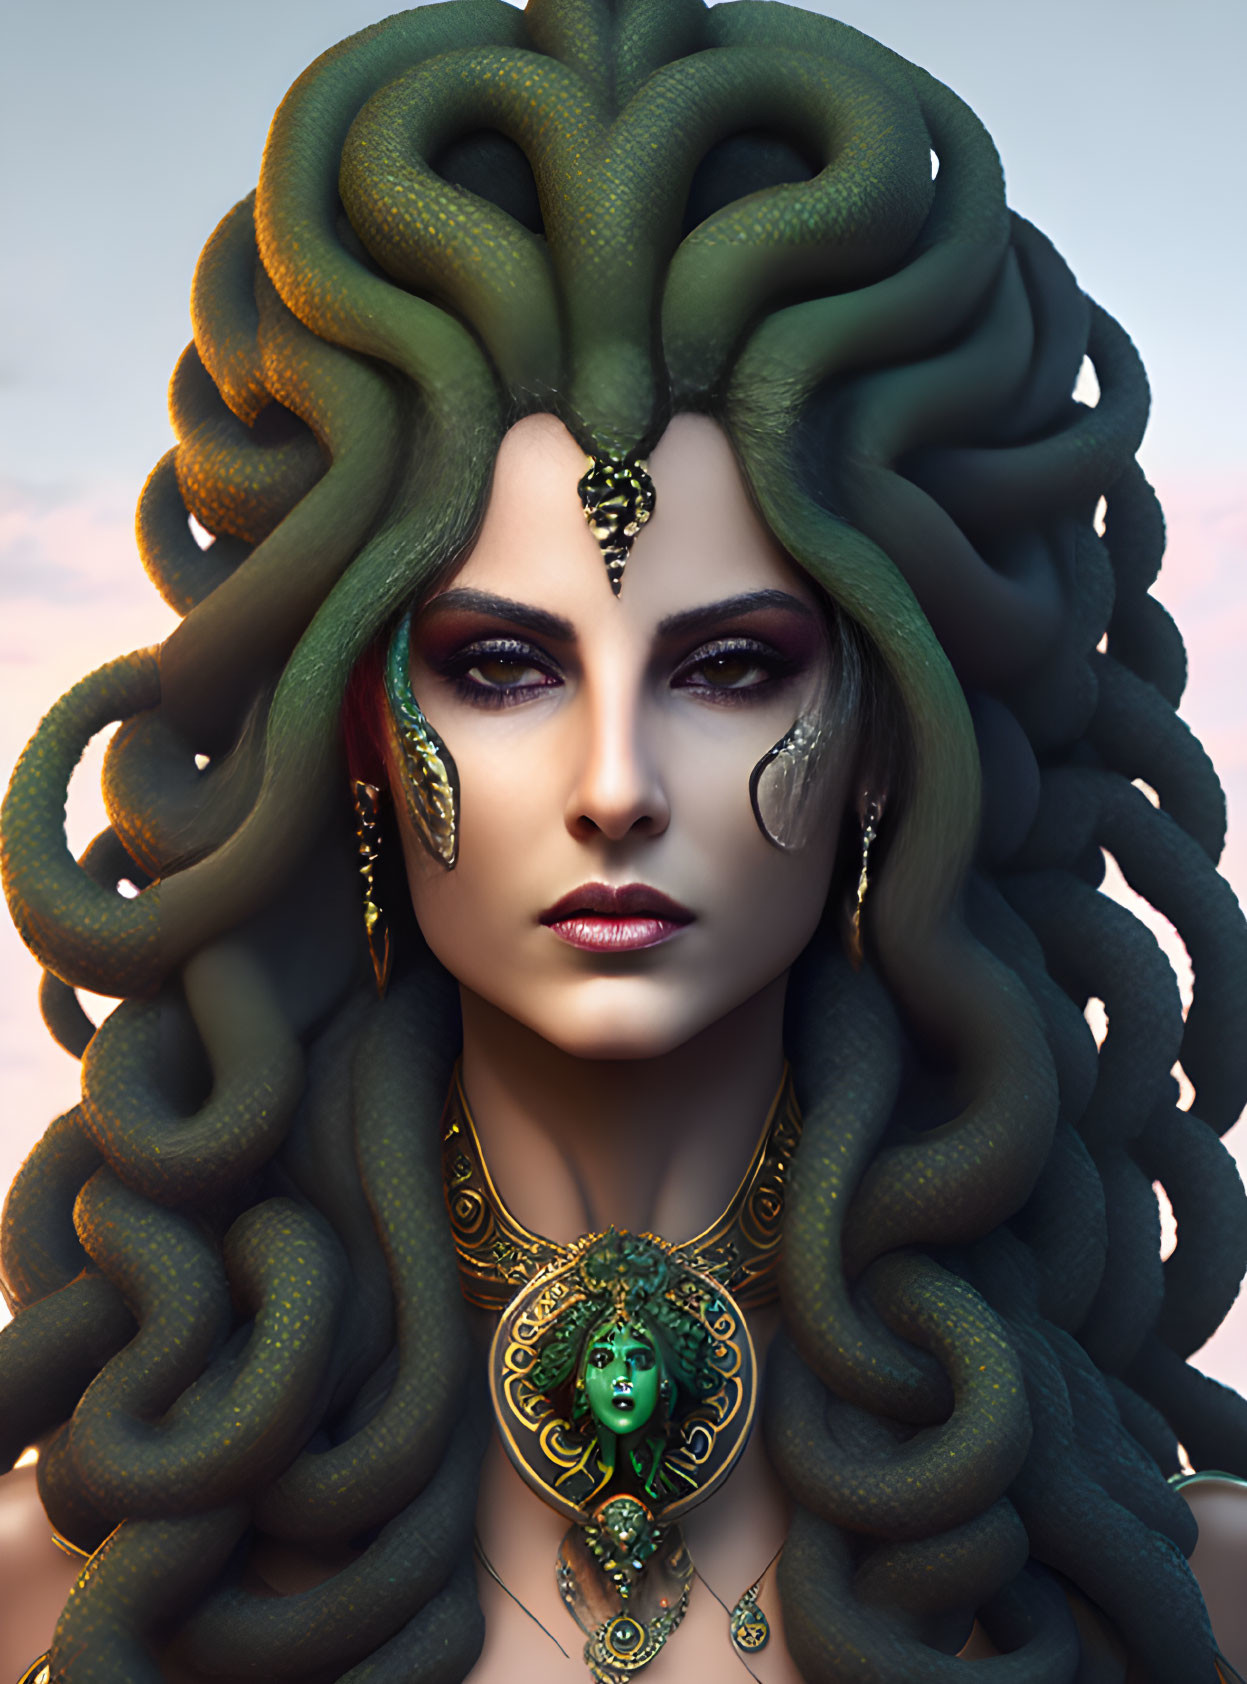 OUR LADY OF THE MANY FORMS - MEDUSA 03022023